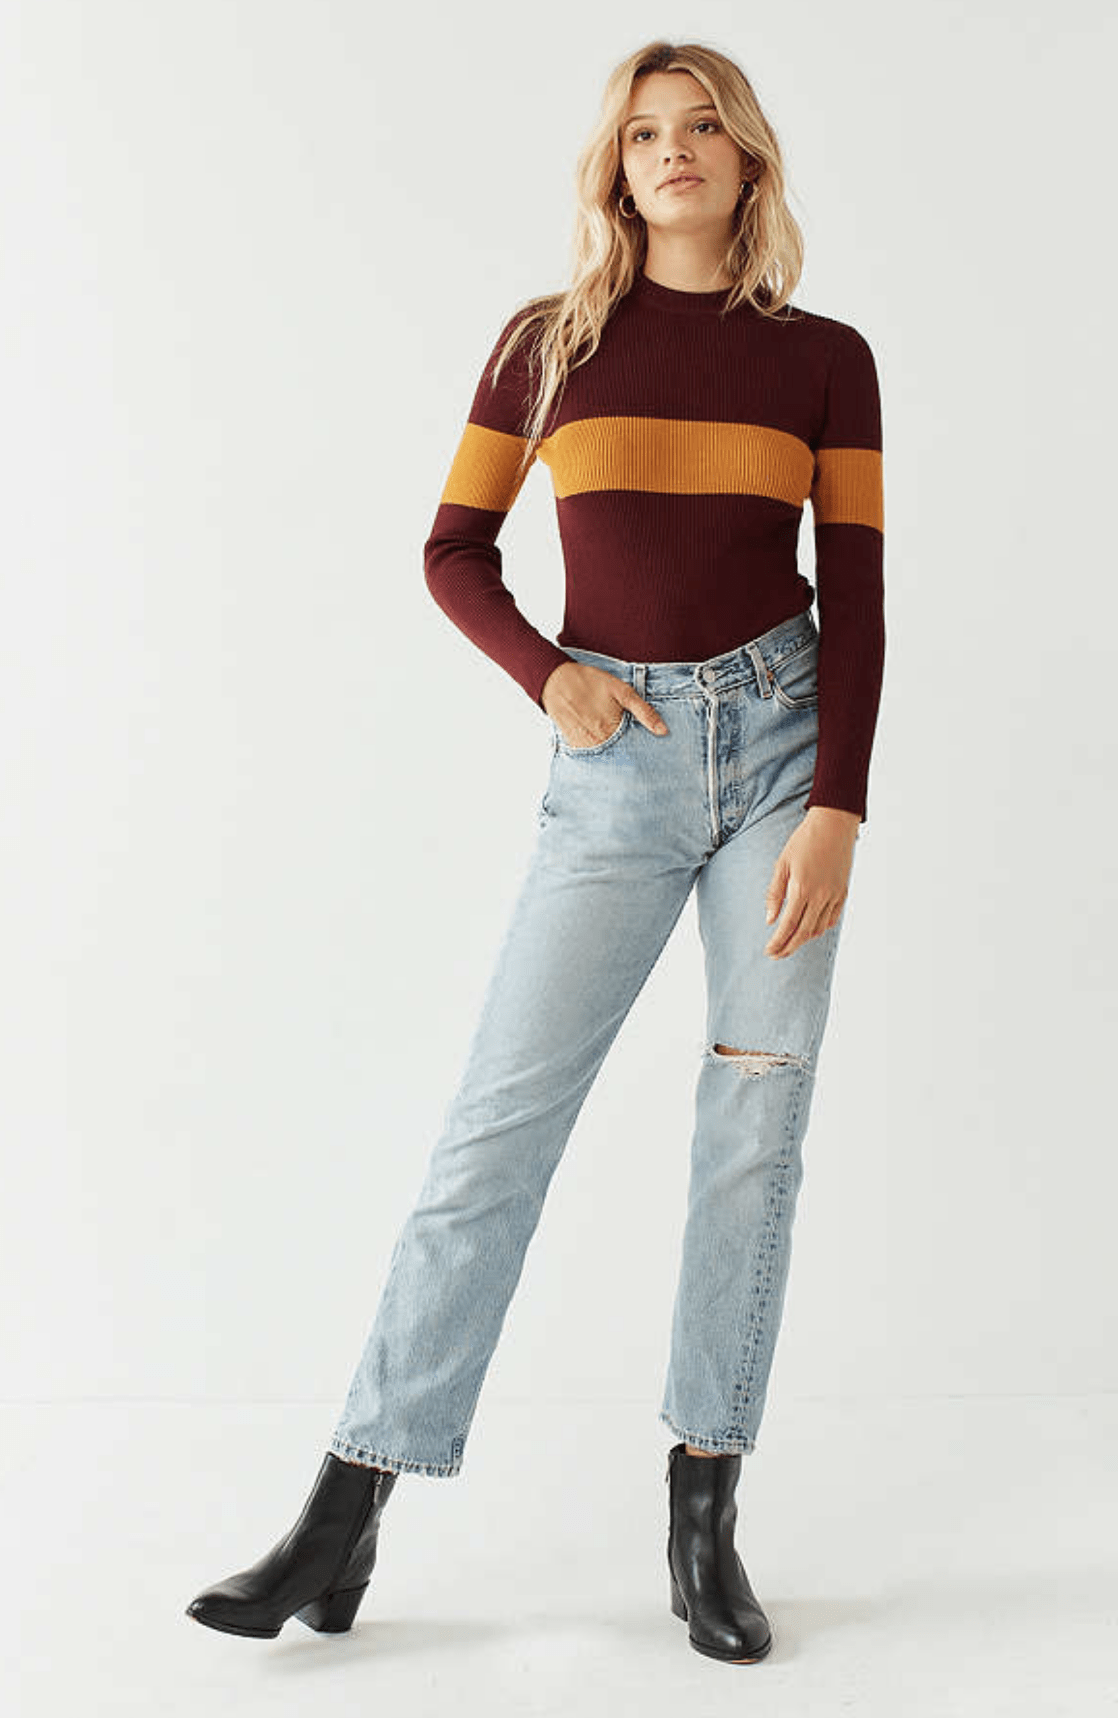  URBAN OUTFITTERS OUT FROM UNDER COLORBLOCKED SWEATER BODYSUIT ($59) 